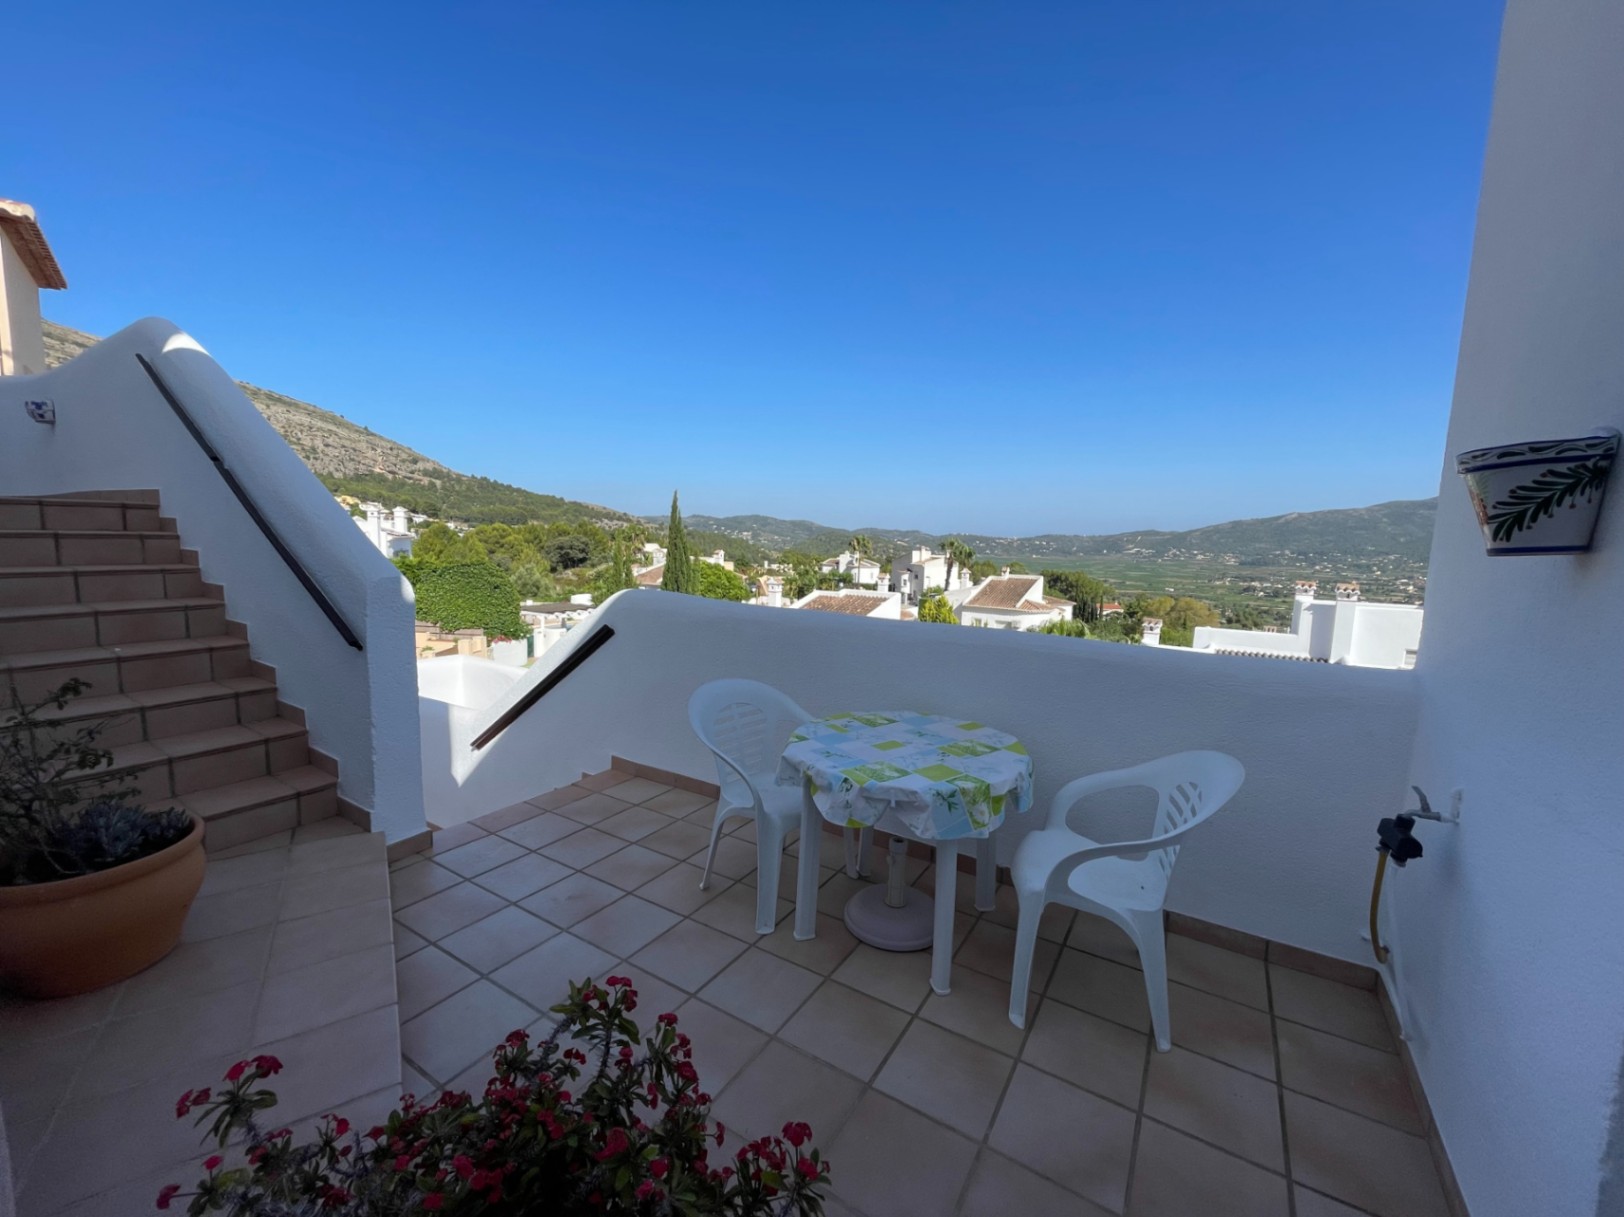 For sale in Jalon: Villa with south-facing  views